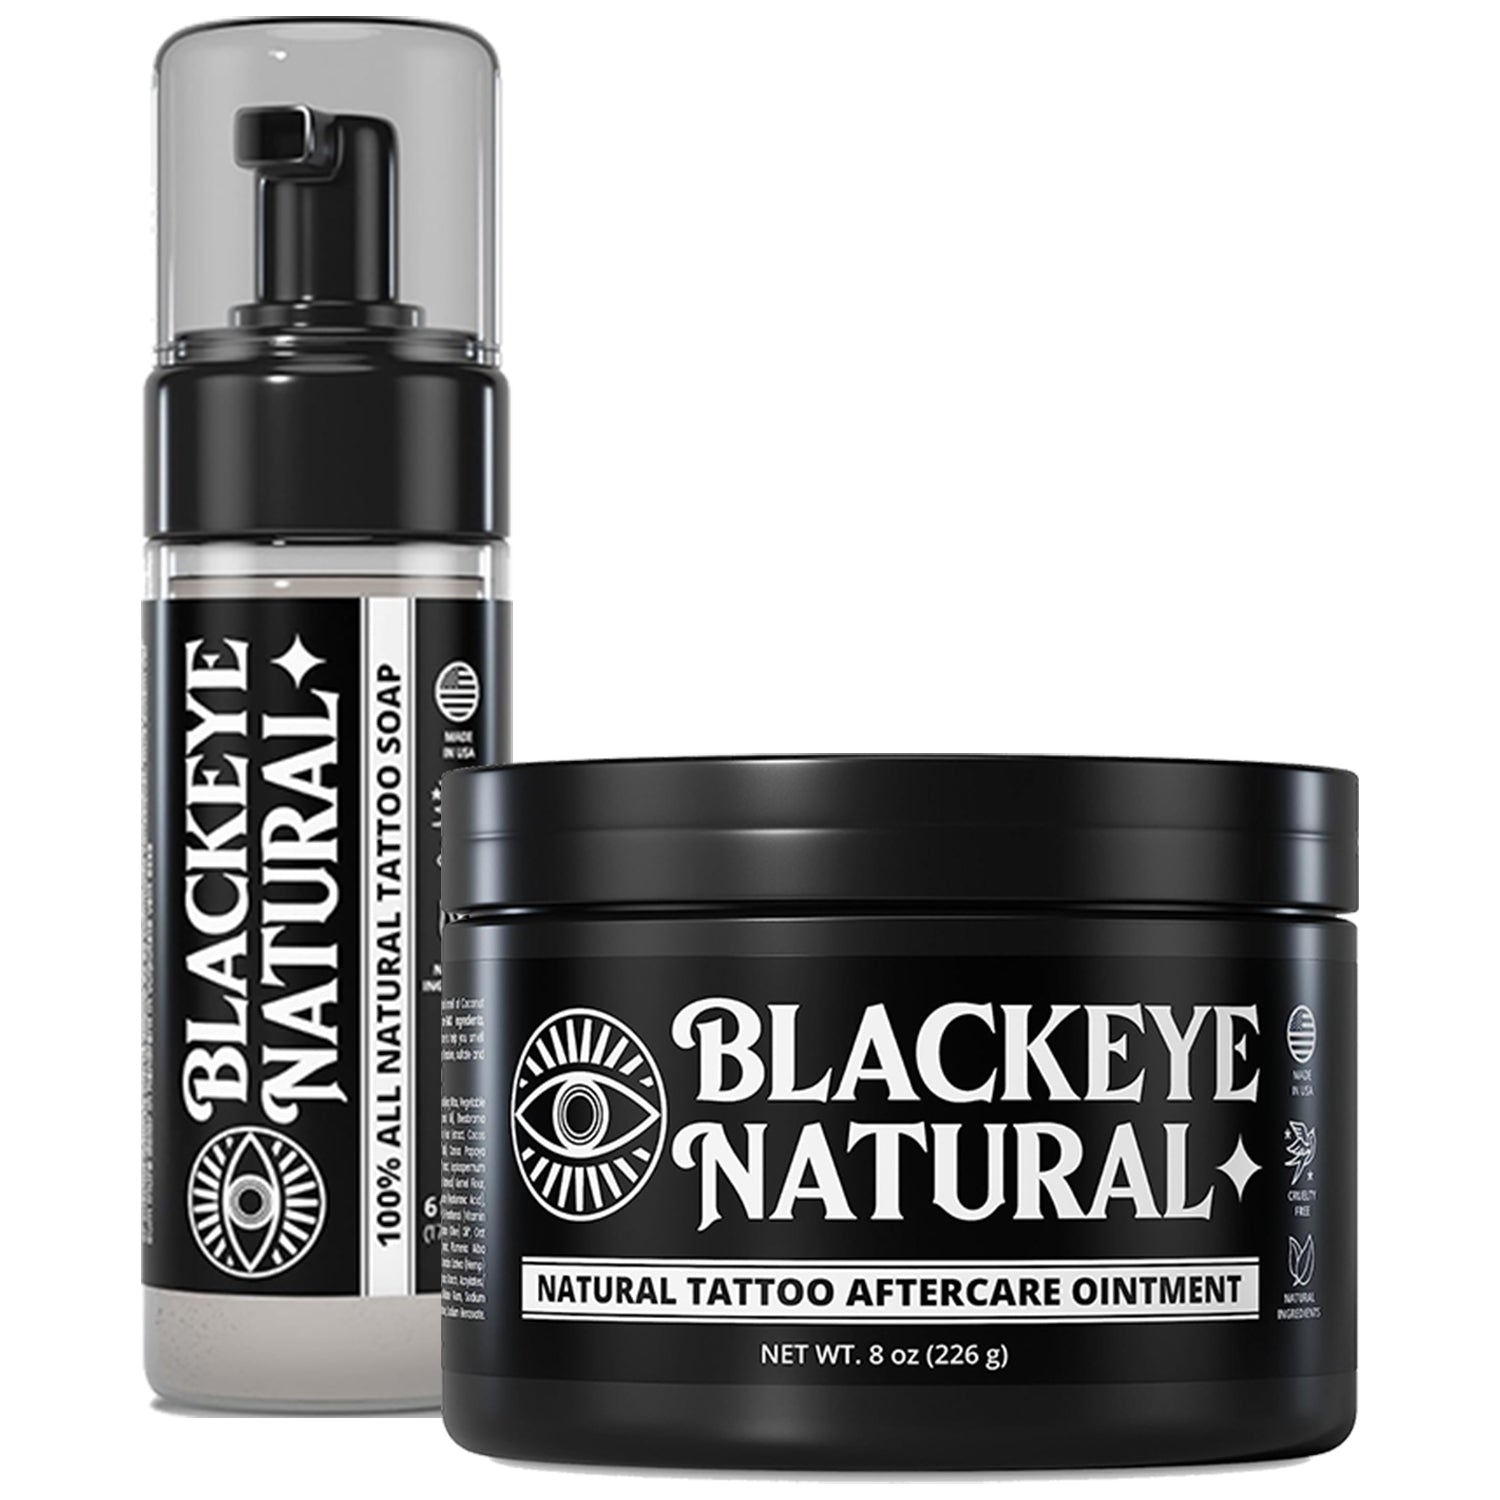 Blackeye Natural Tattoo Aftercare Ointments